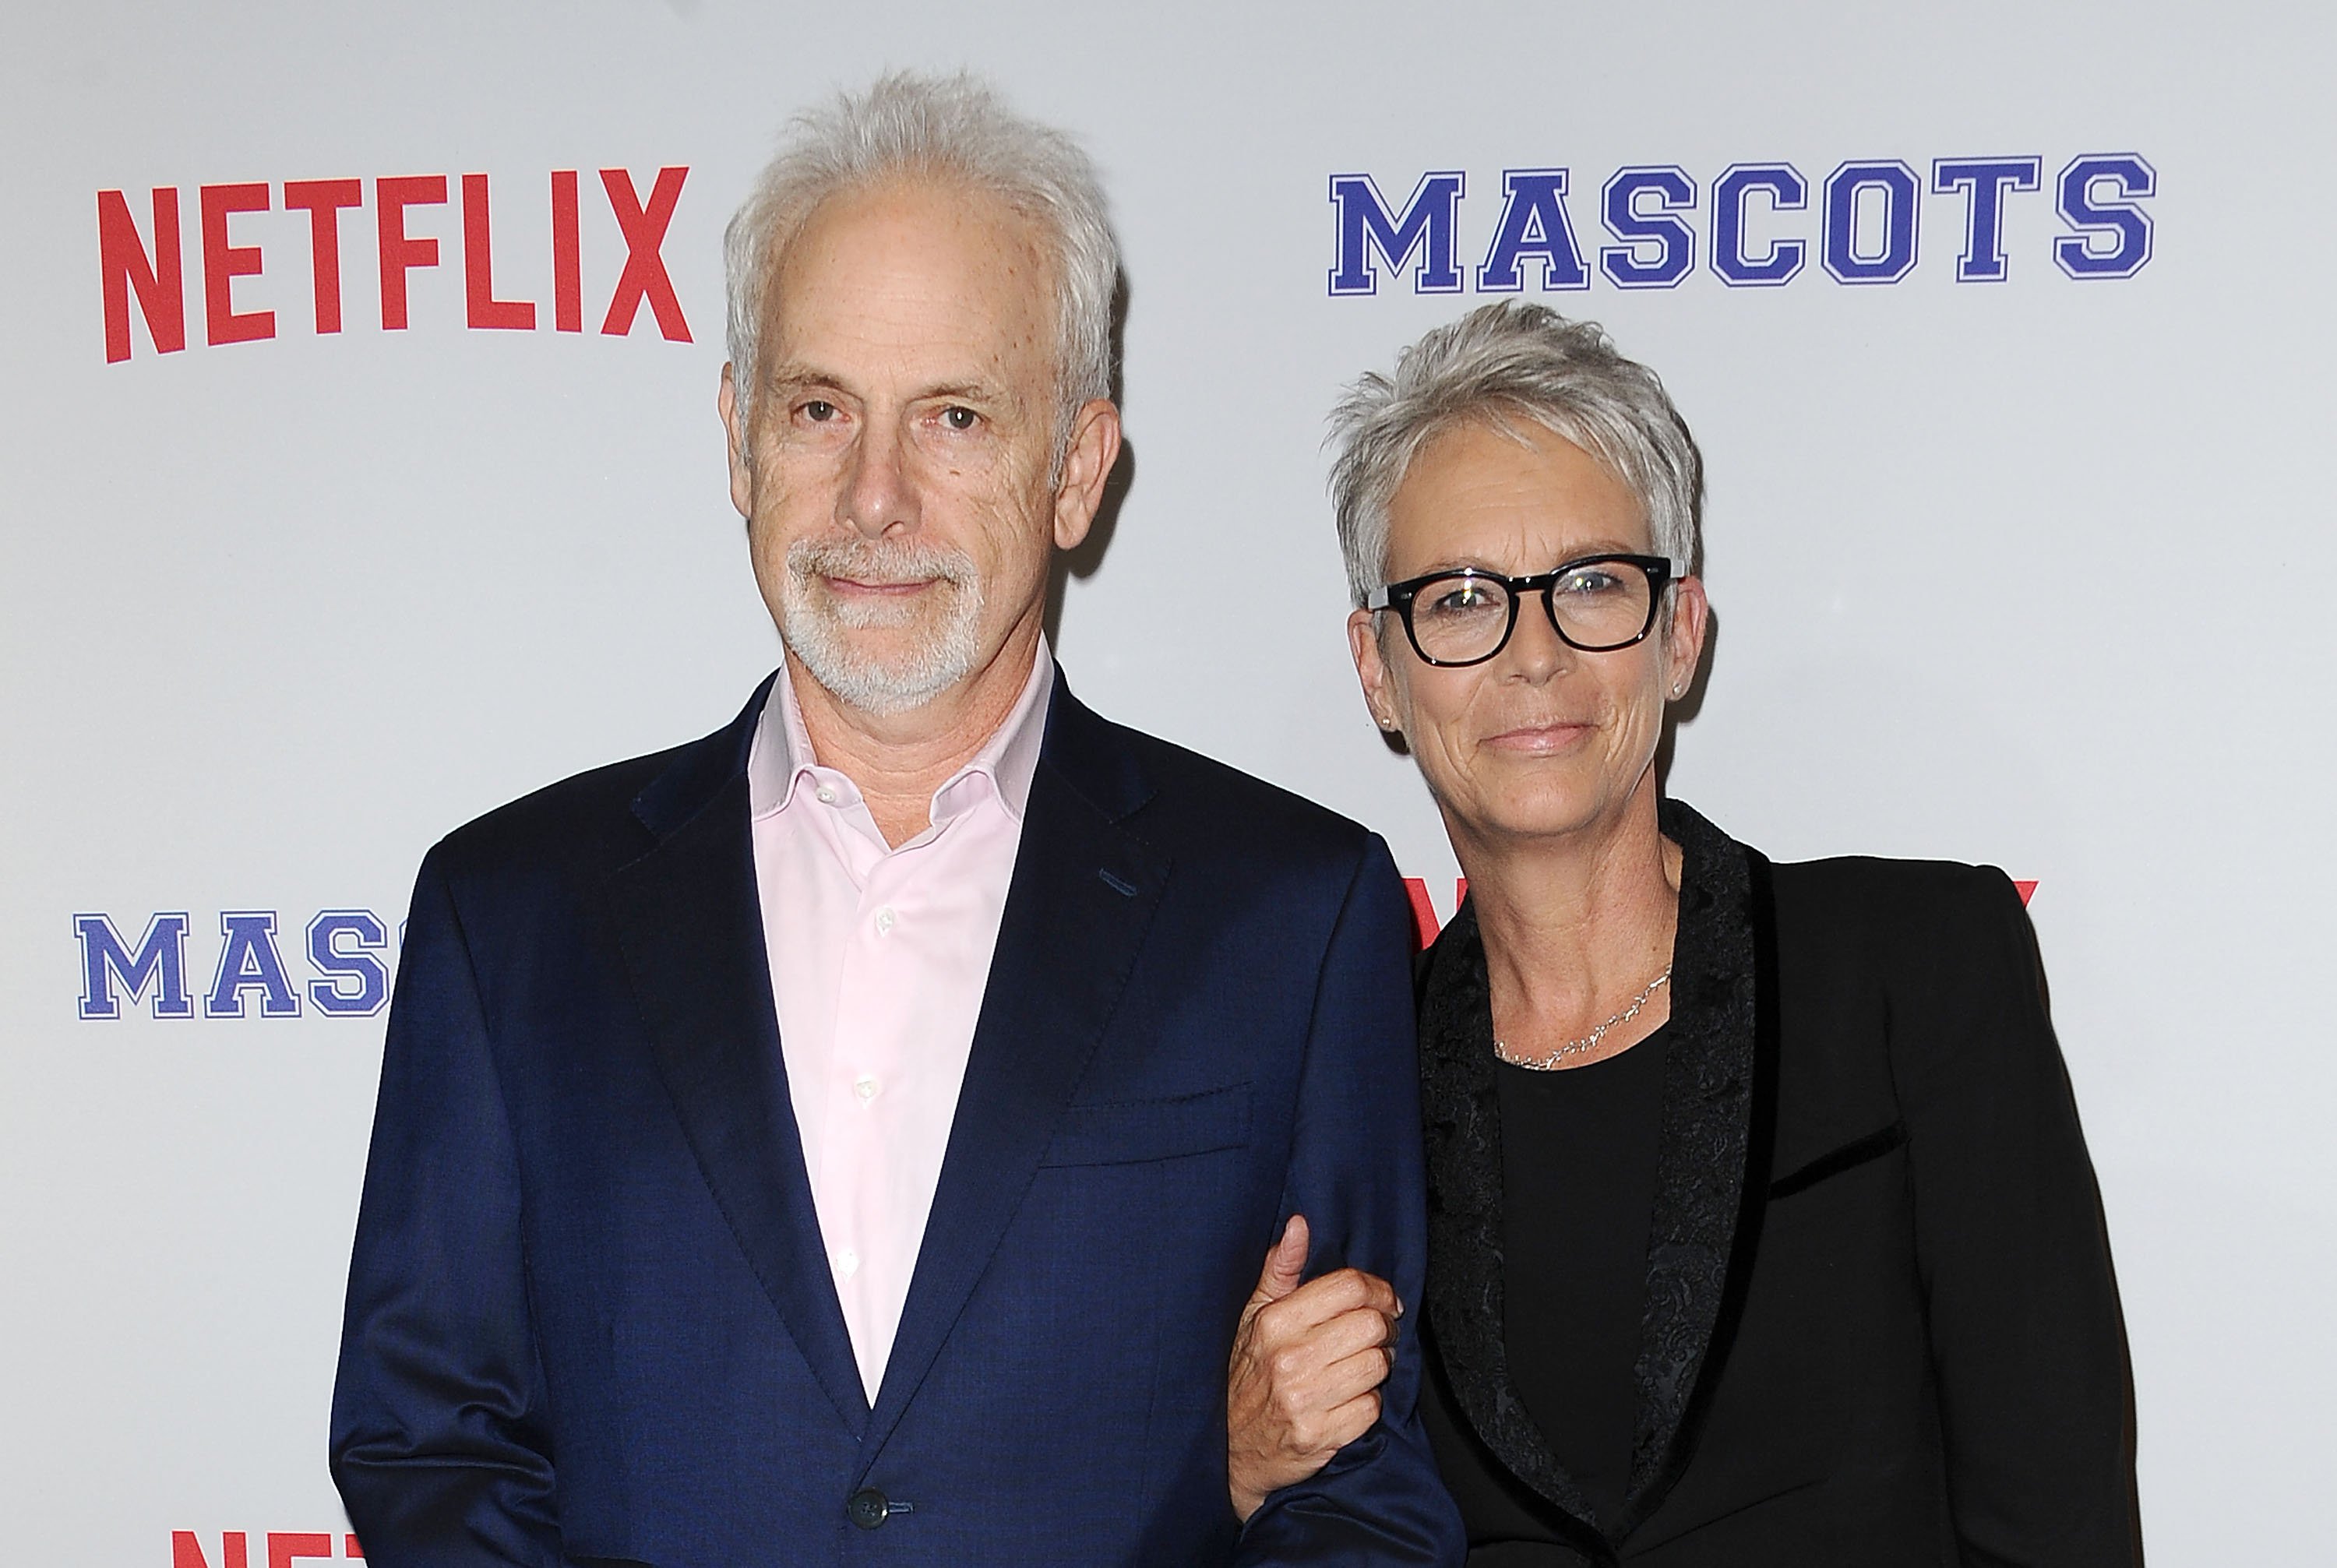 Christopher Guest and Jamie Lee Curtis, who is younger than her husband, attend a screening of 'Mascots'